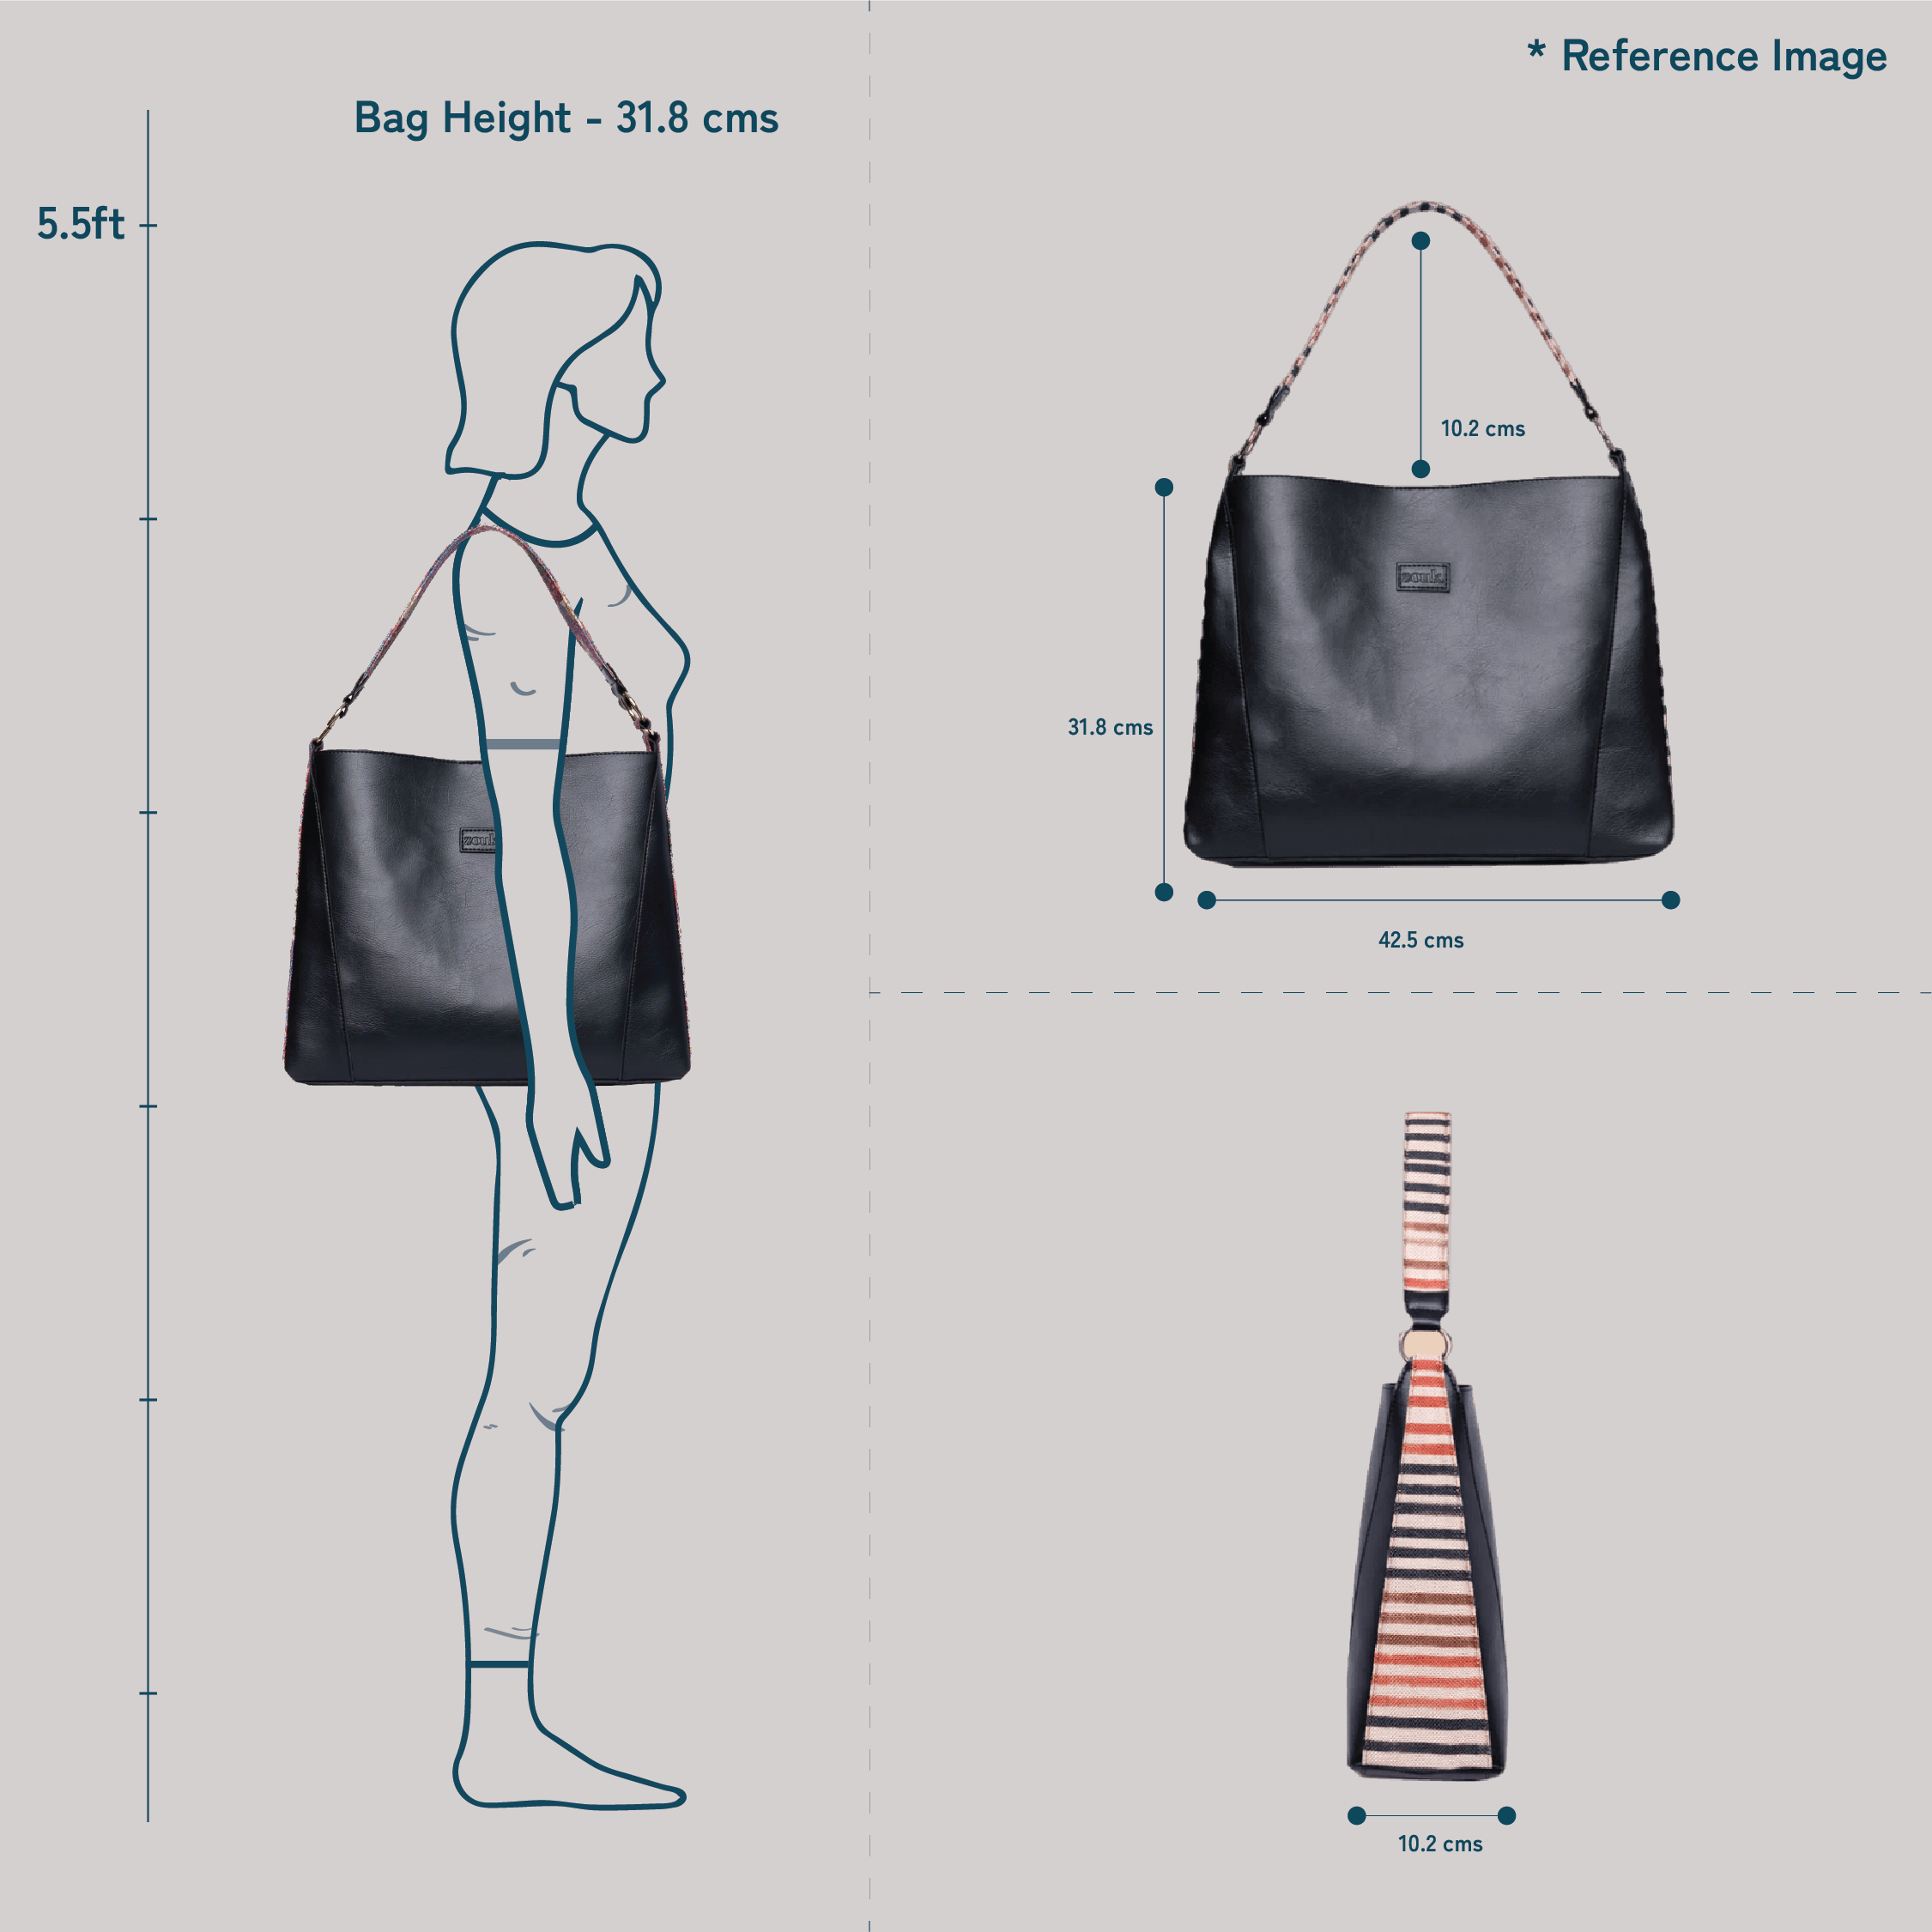 The Marvelous, Large Tote Bag